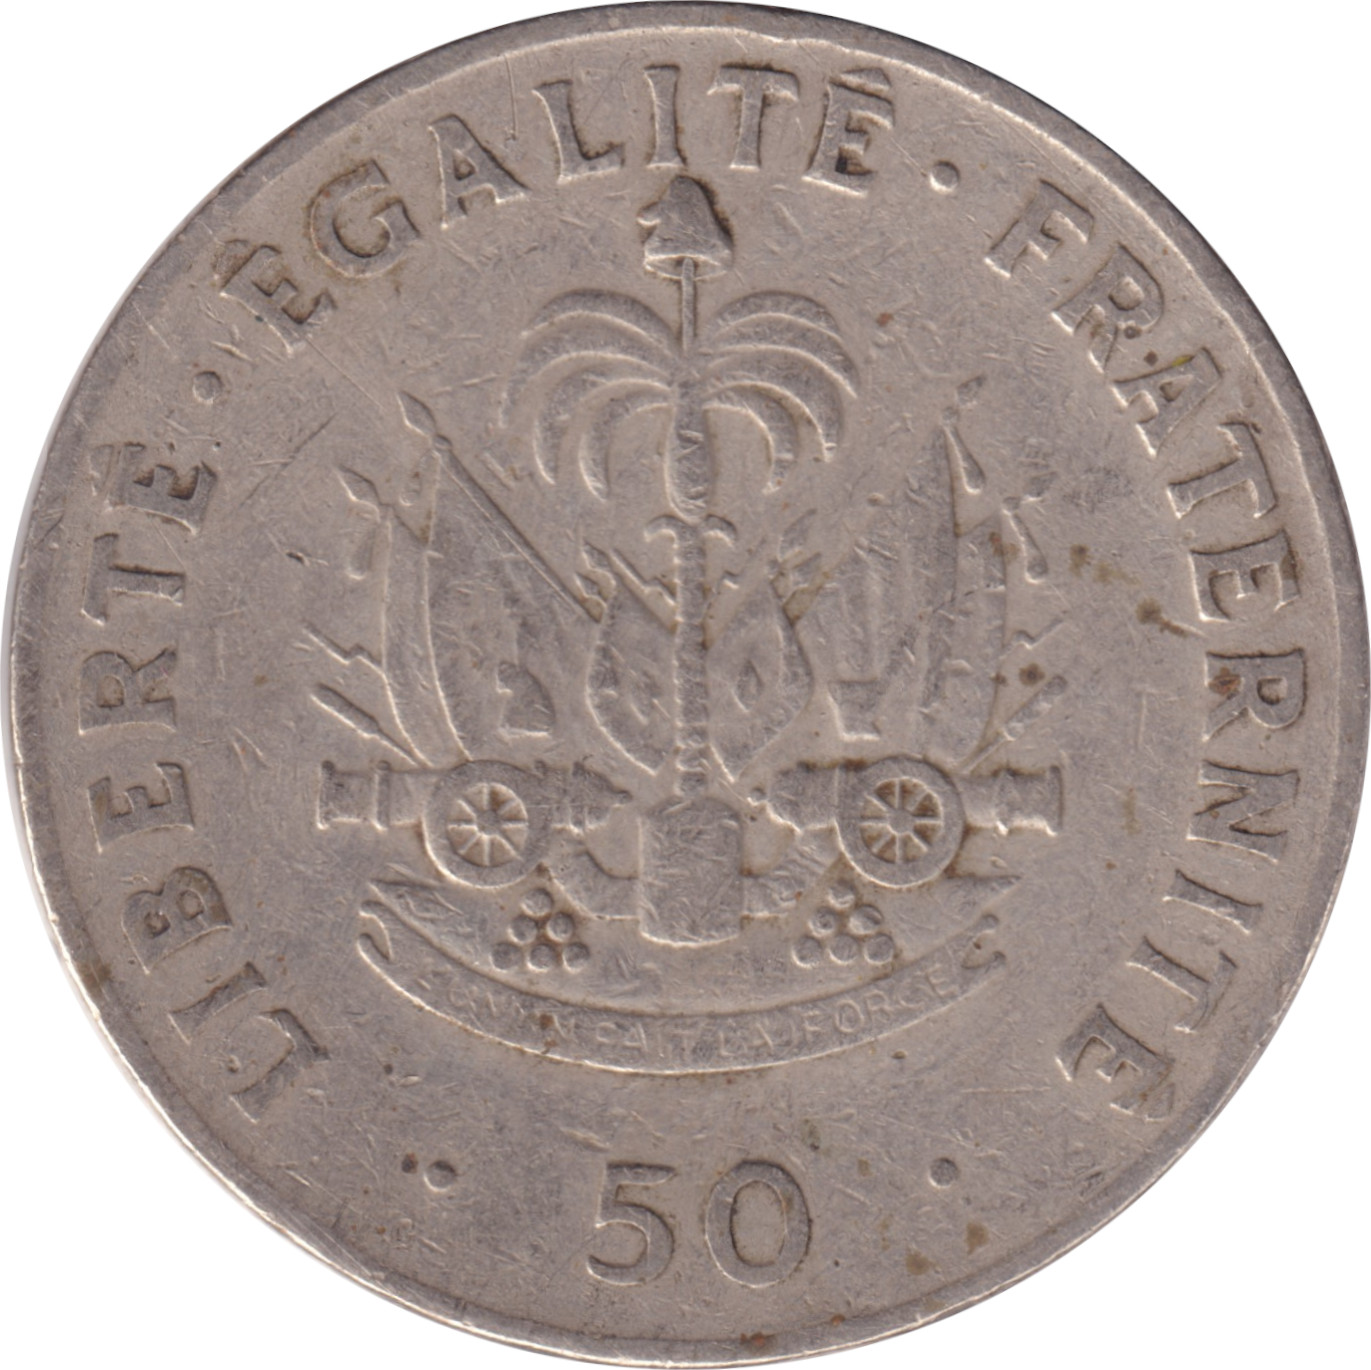 50 centimes - Charlemagne Peralte